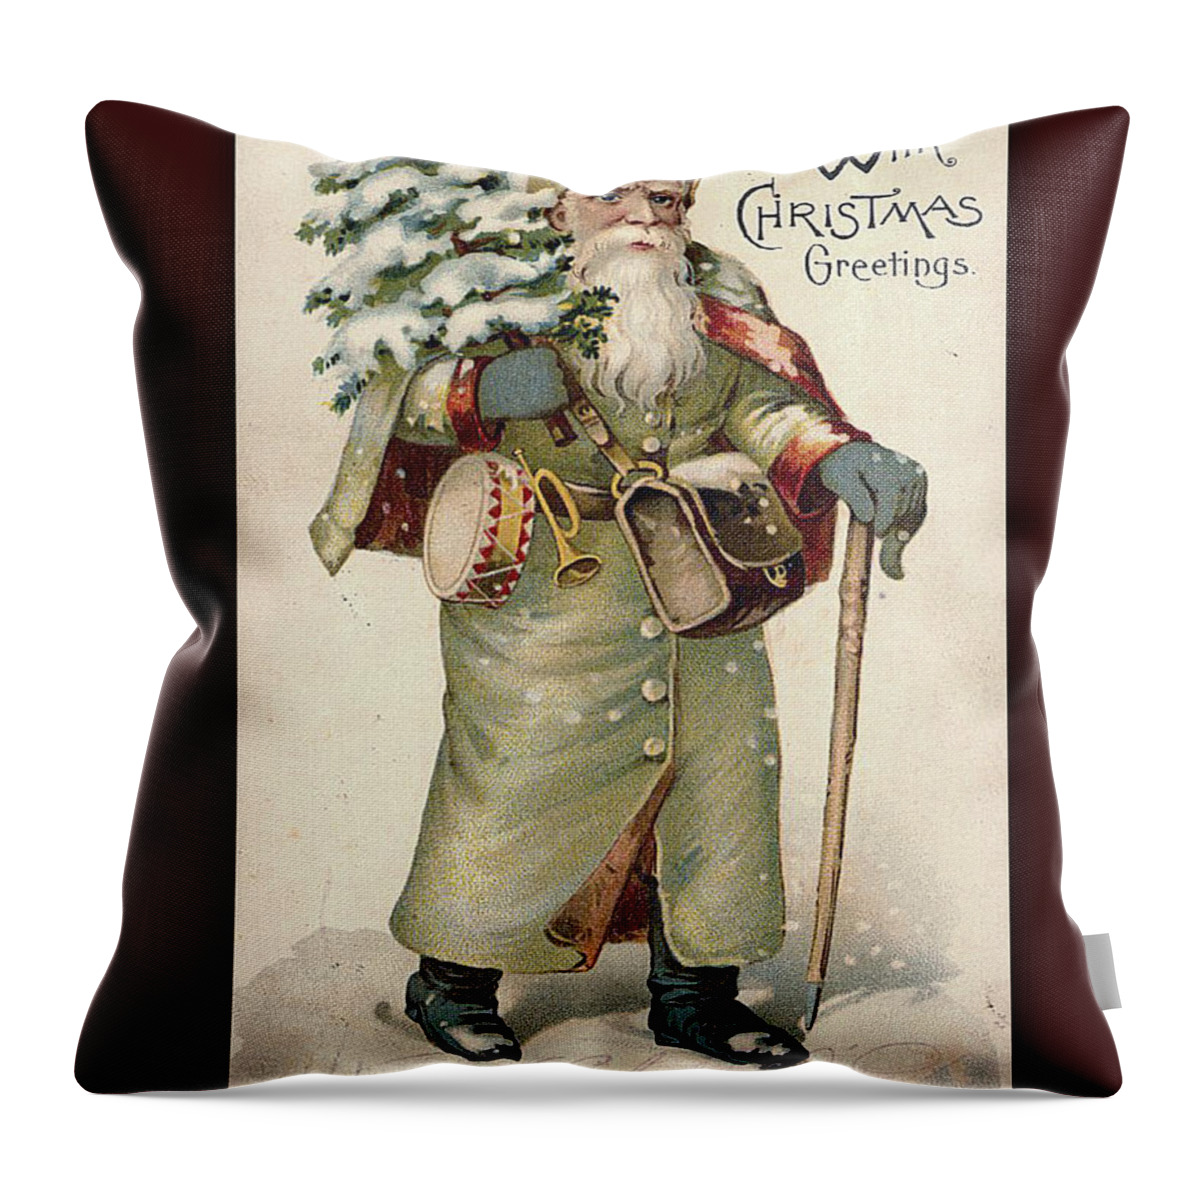 Vintage Throw Pillow featuring the digital art Vintage Christmas Greeting by Melissa Messick